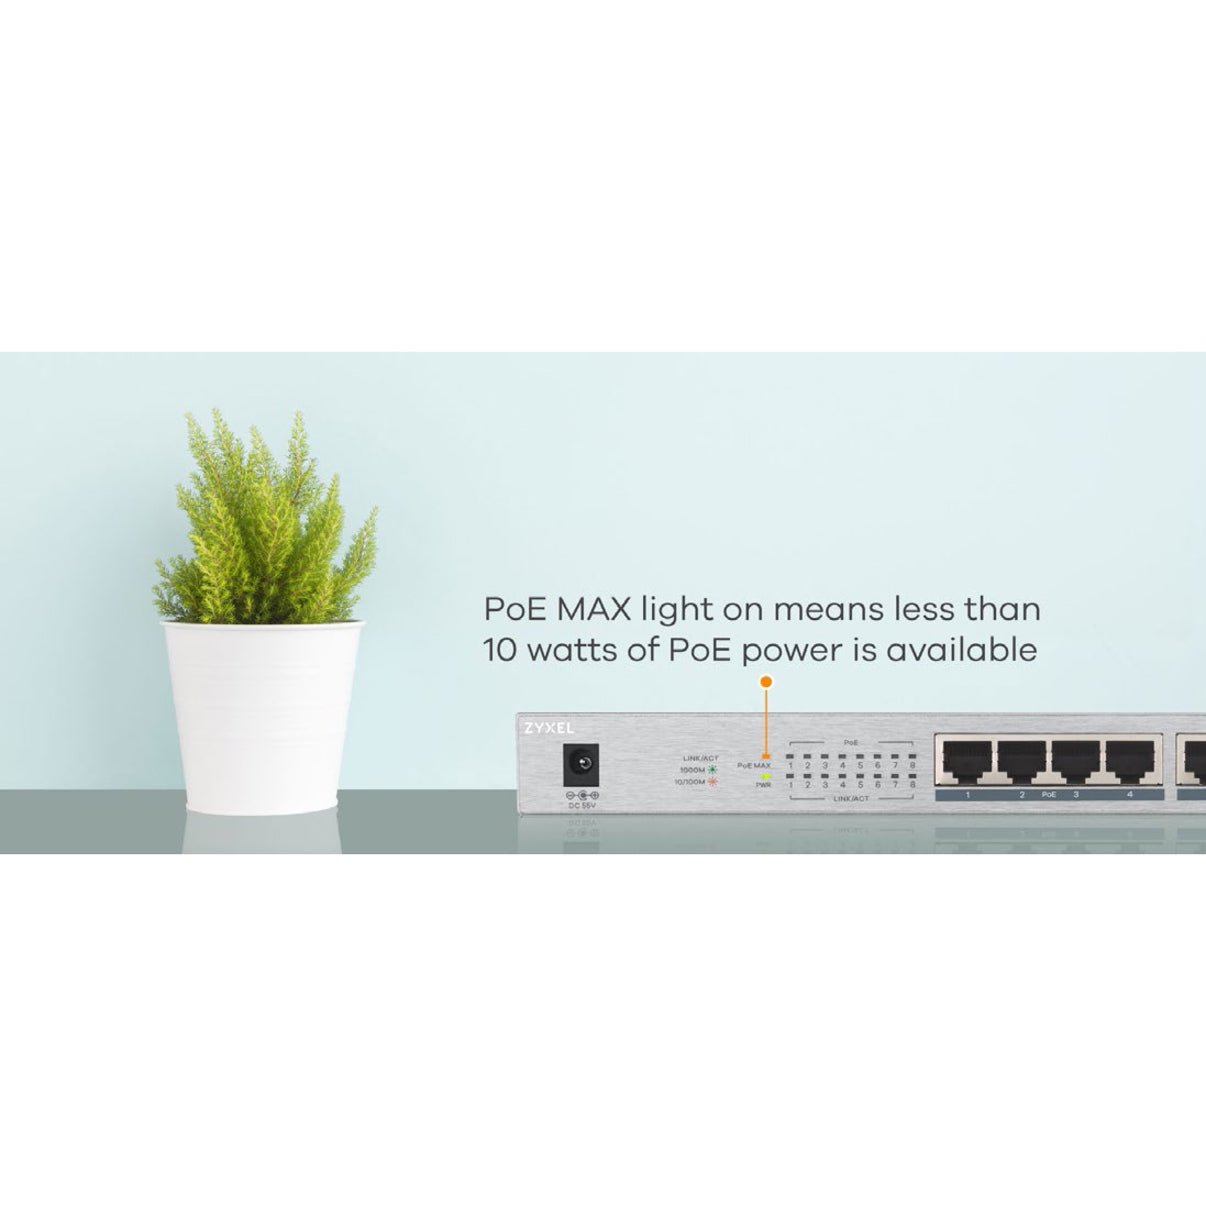 ZYXEL GS1008HP 8-Port GbE Unmanaged PoE Switch, High-Speed Networking Solution